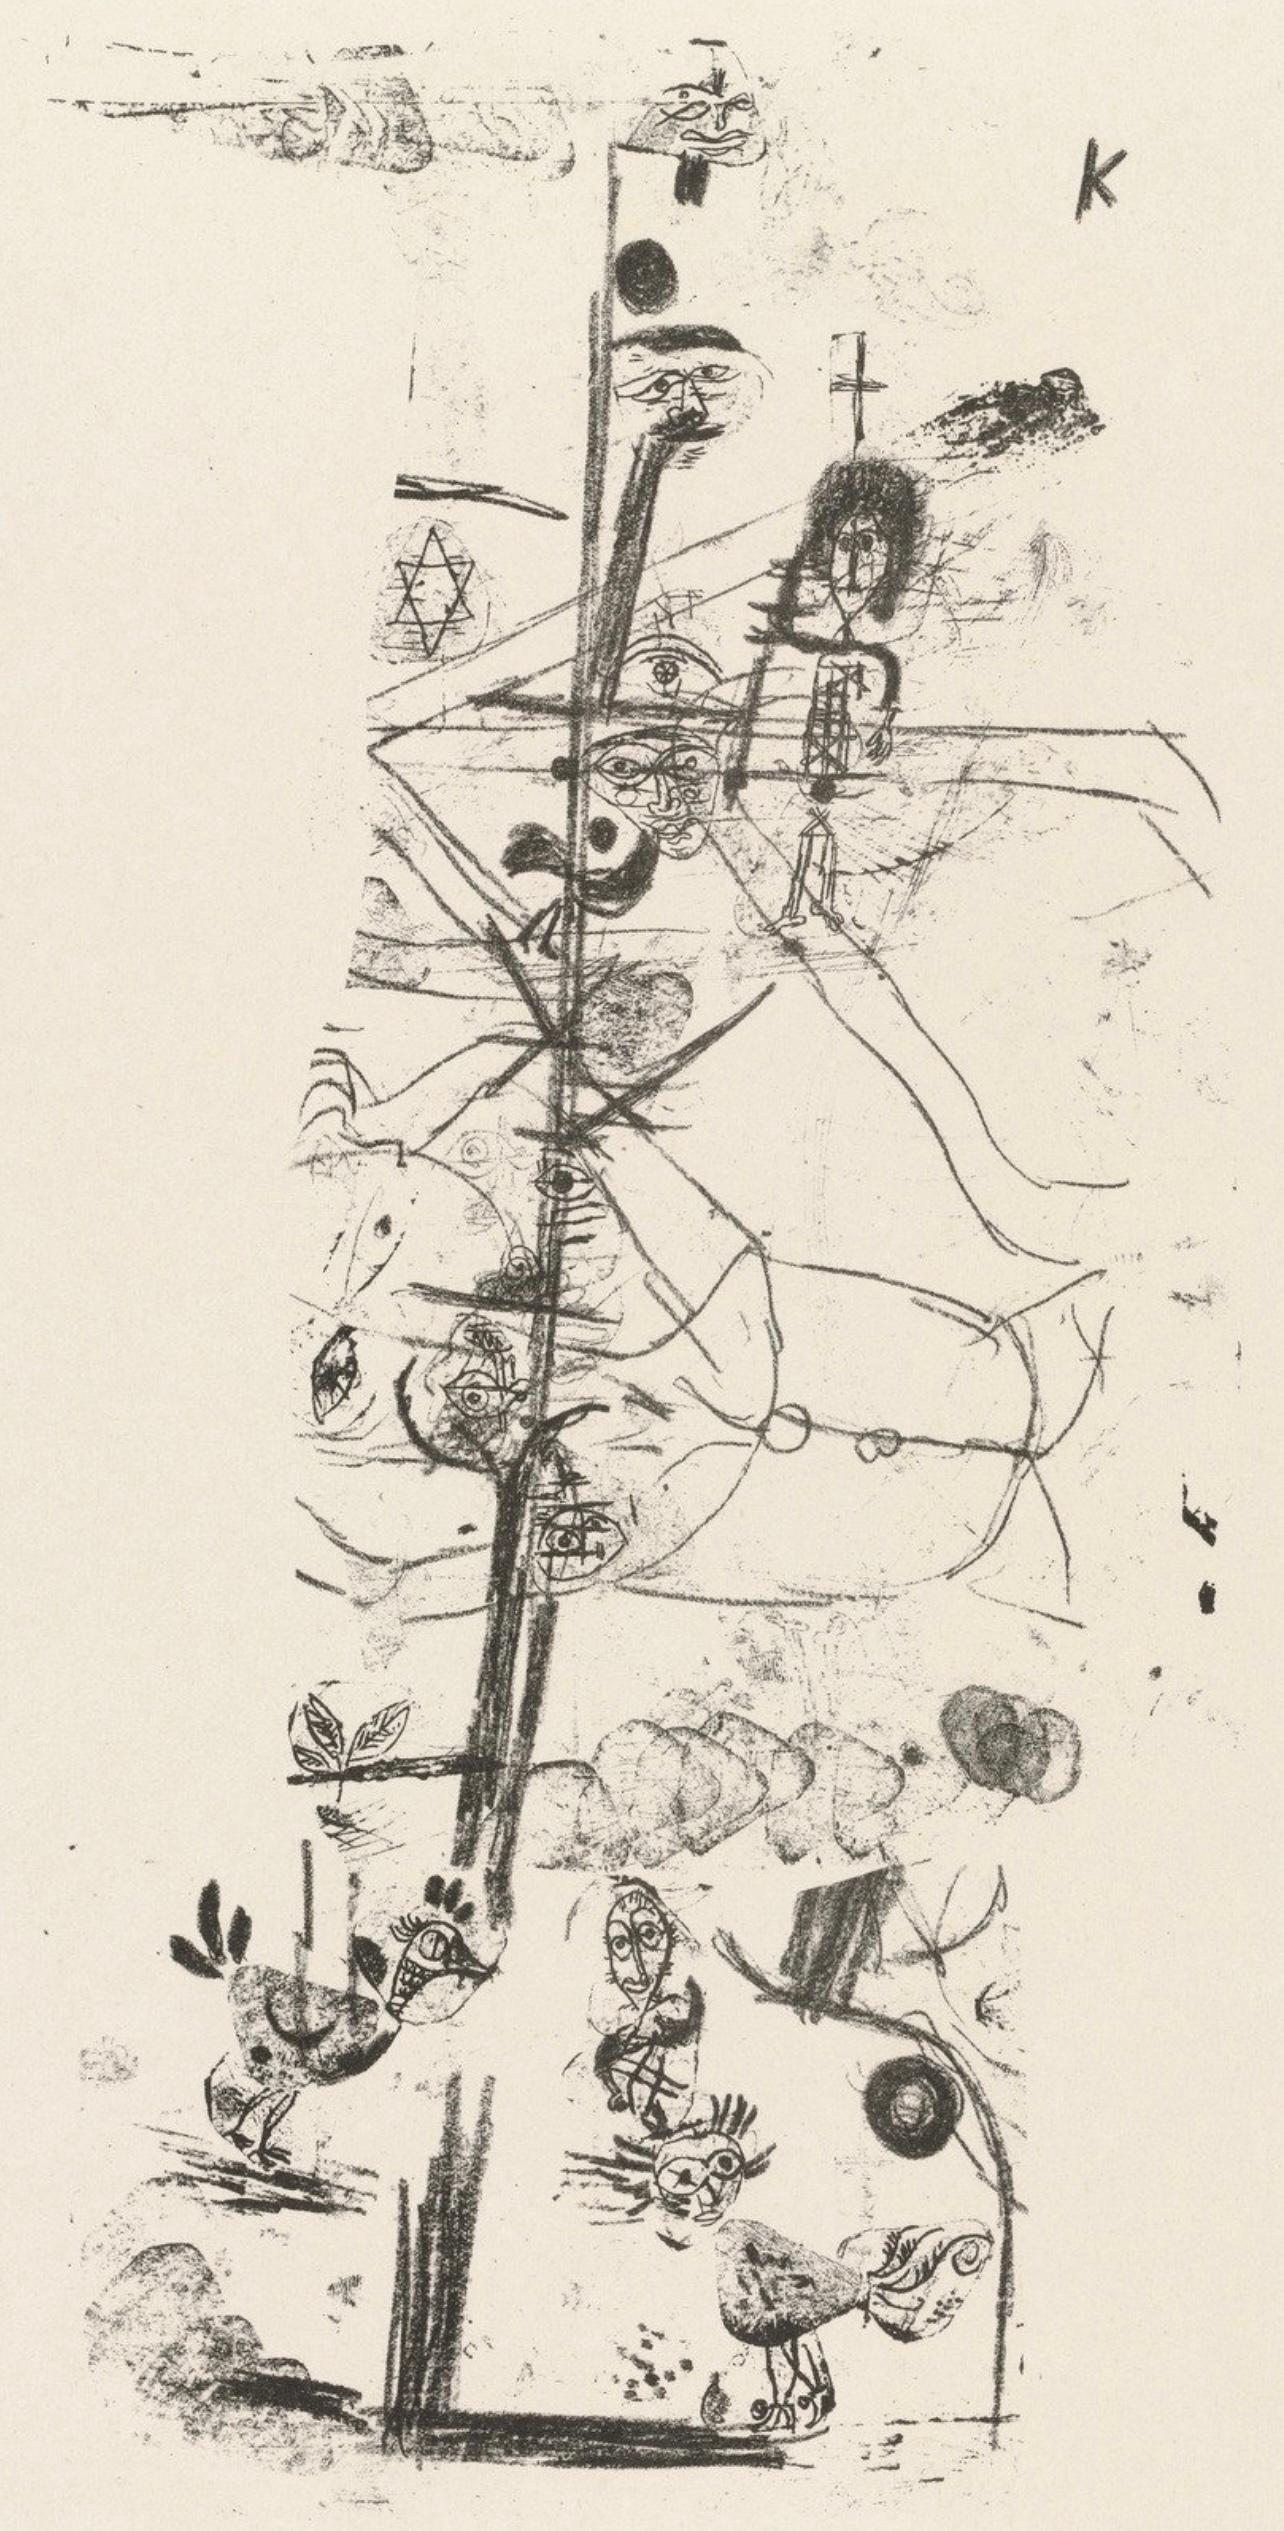 Original Limited Edition Etching on vellum paper. Inscription: Unsigned and unnumbered. Edition: 2,000. Good condition. Notes: From the folio, Prints of Paul Klee, 1947. Published by the Museum of Modern Art, New York; printed by Meriden Gravure